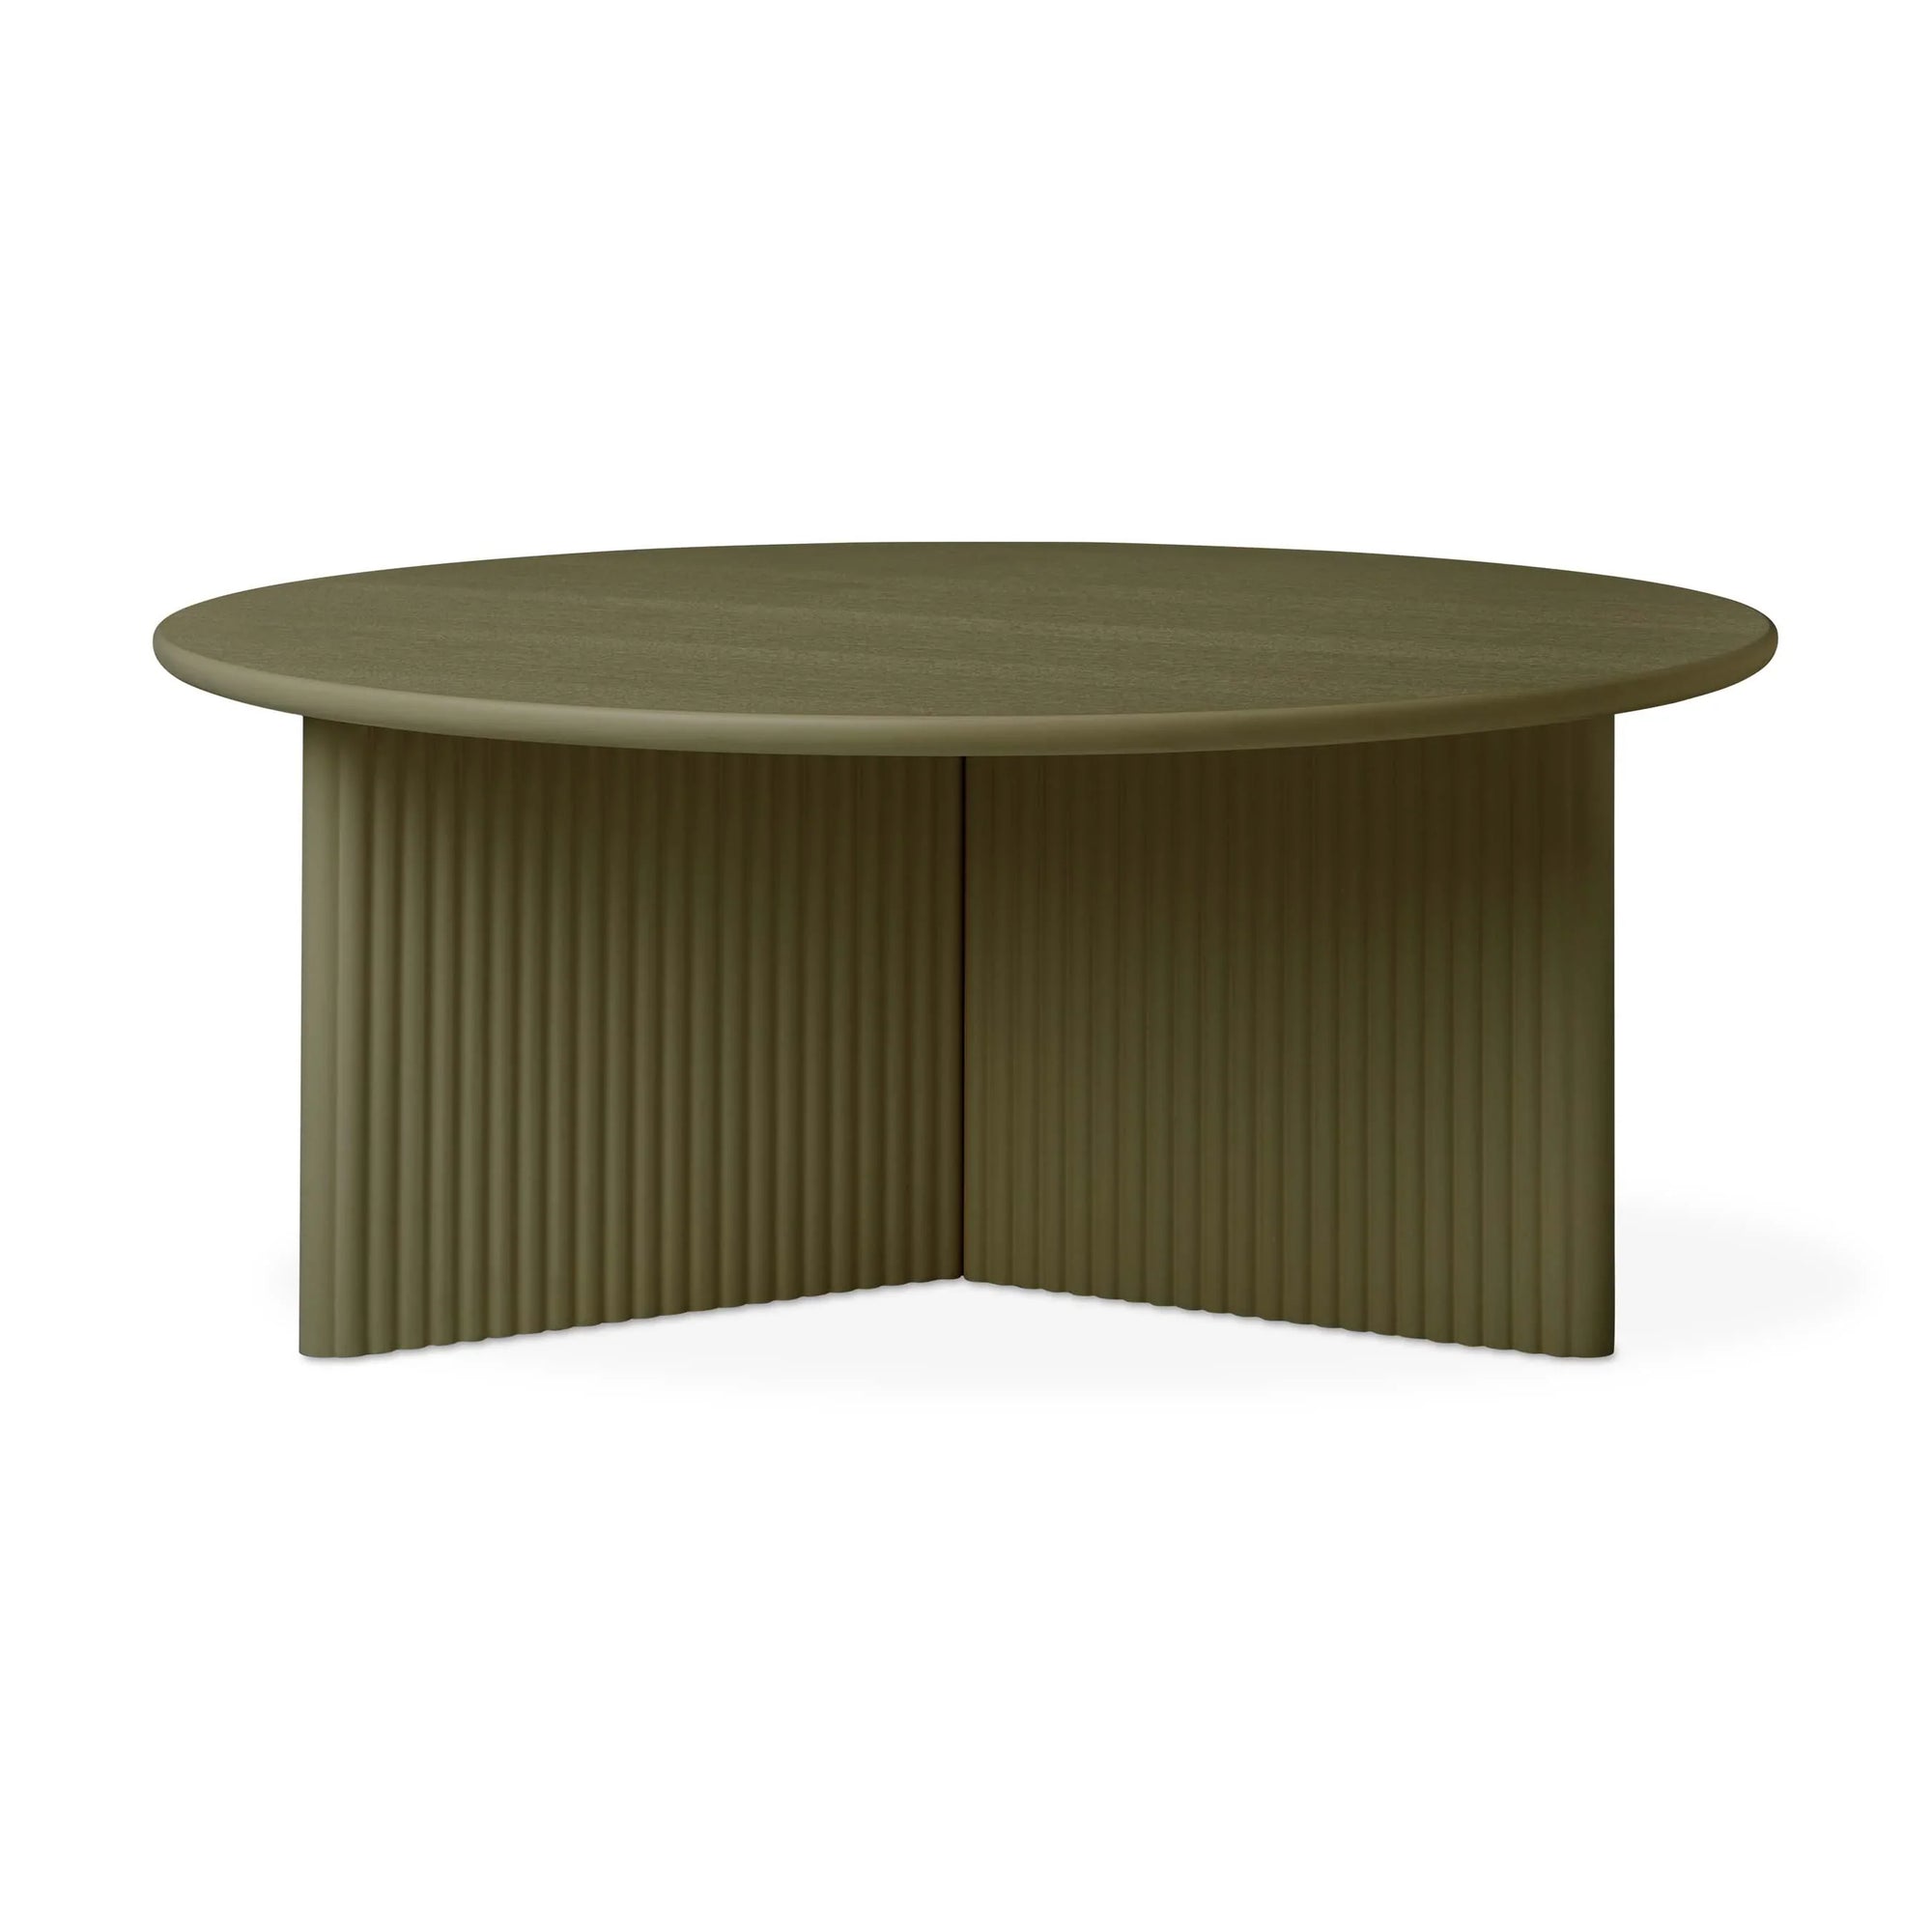 Gus* Modern Odeon Coffee Table - Olive